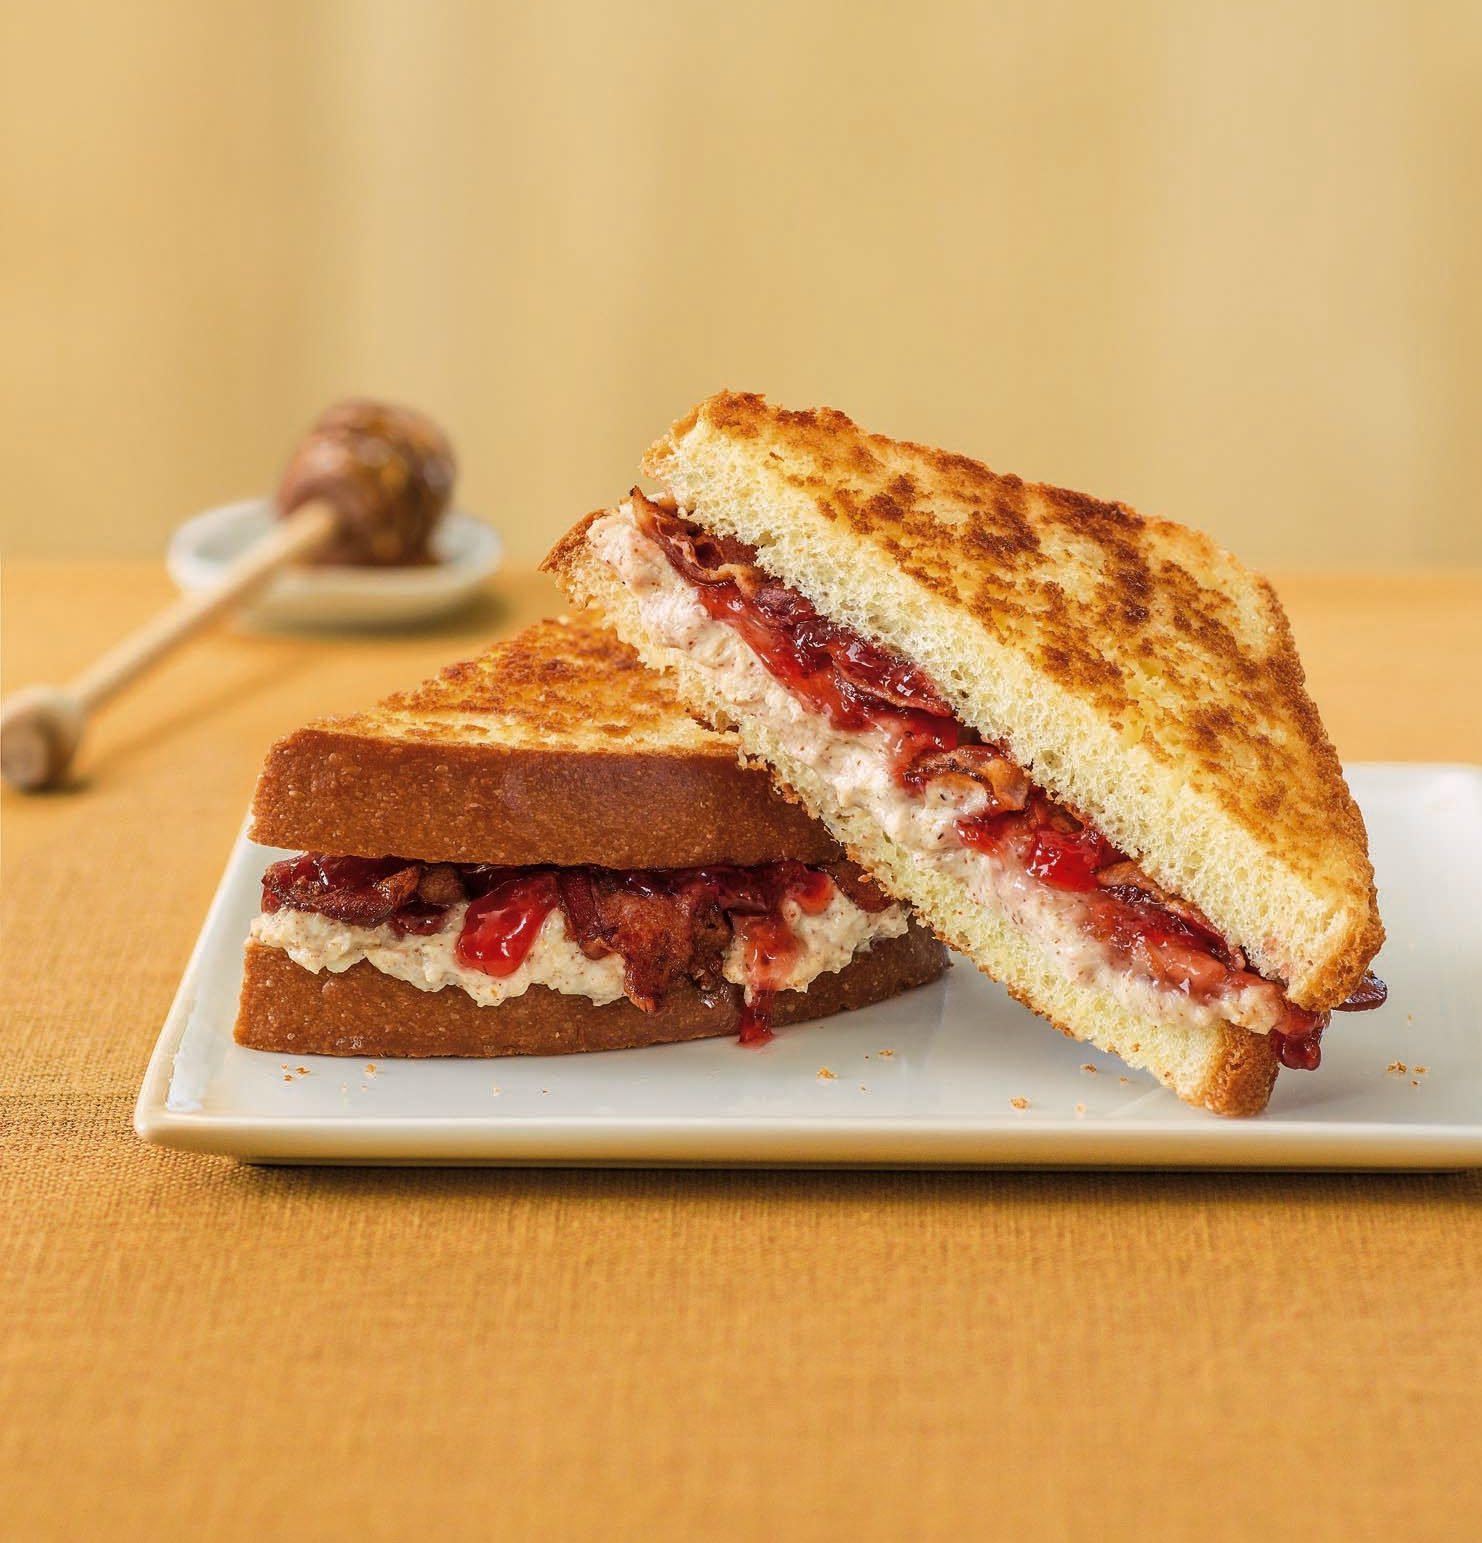 Ricotta Almond Butter and Jam Grilled Cheese